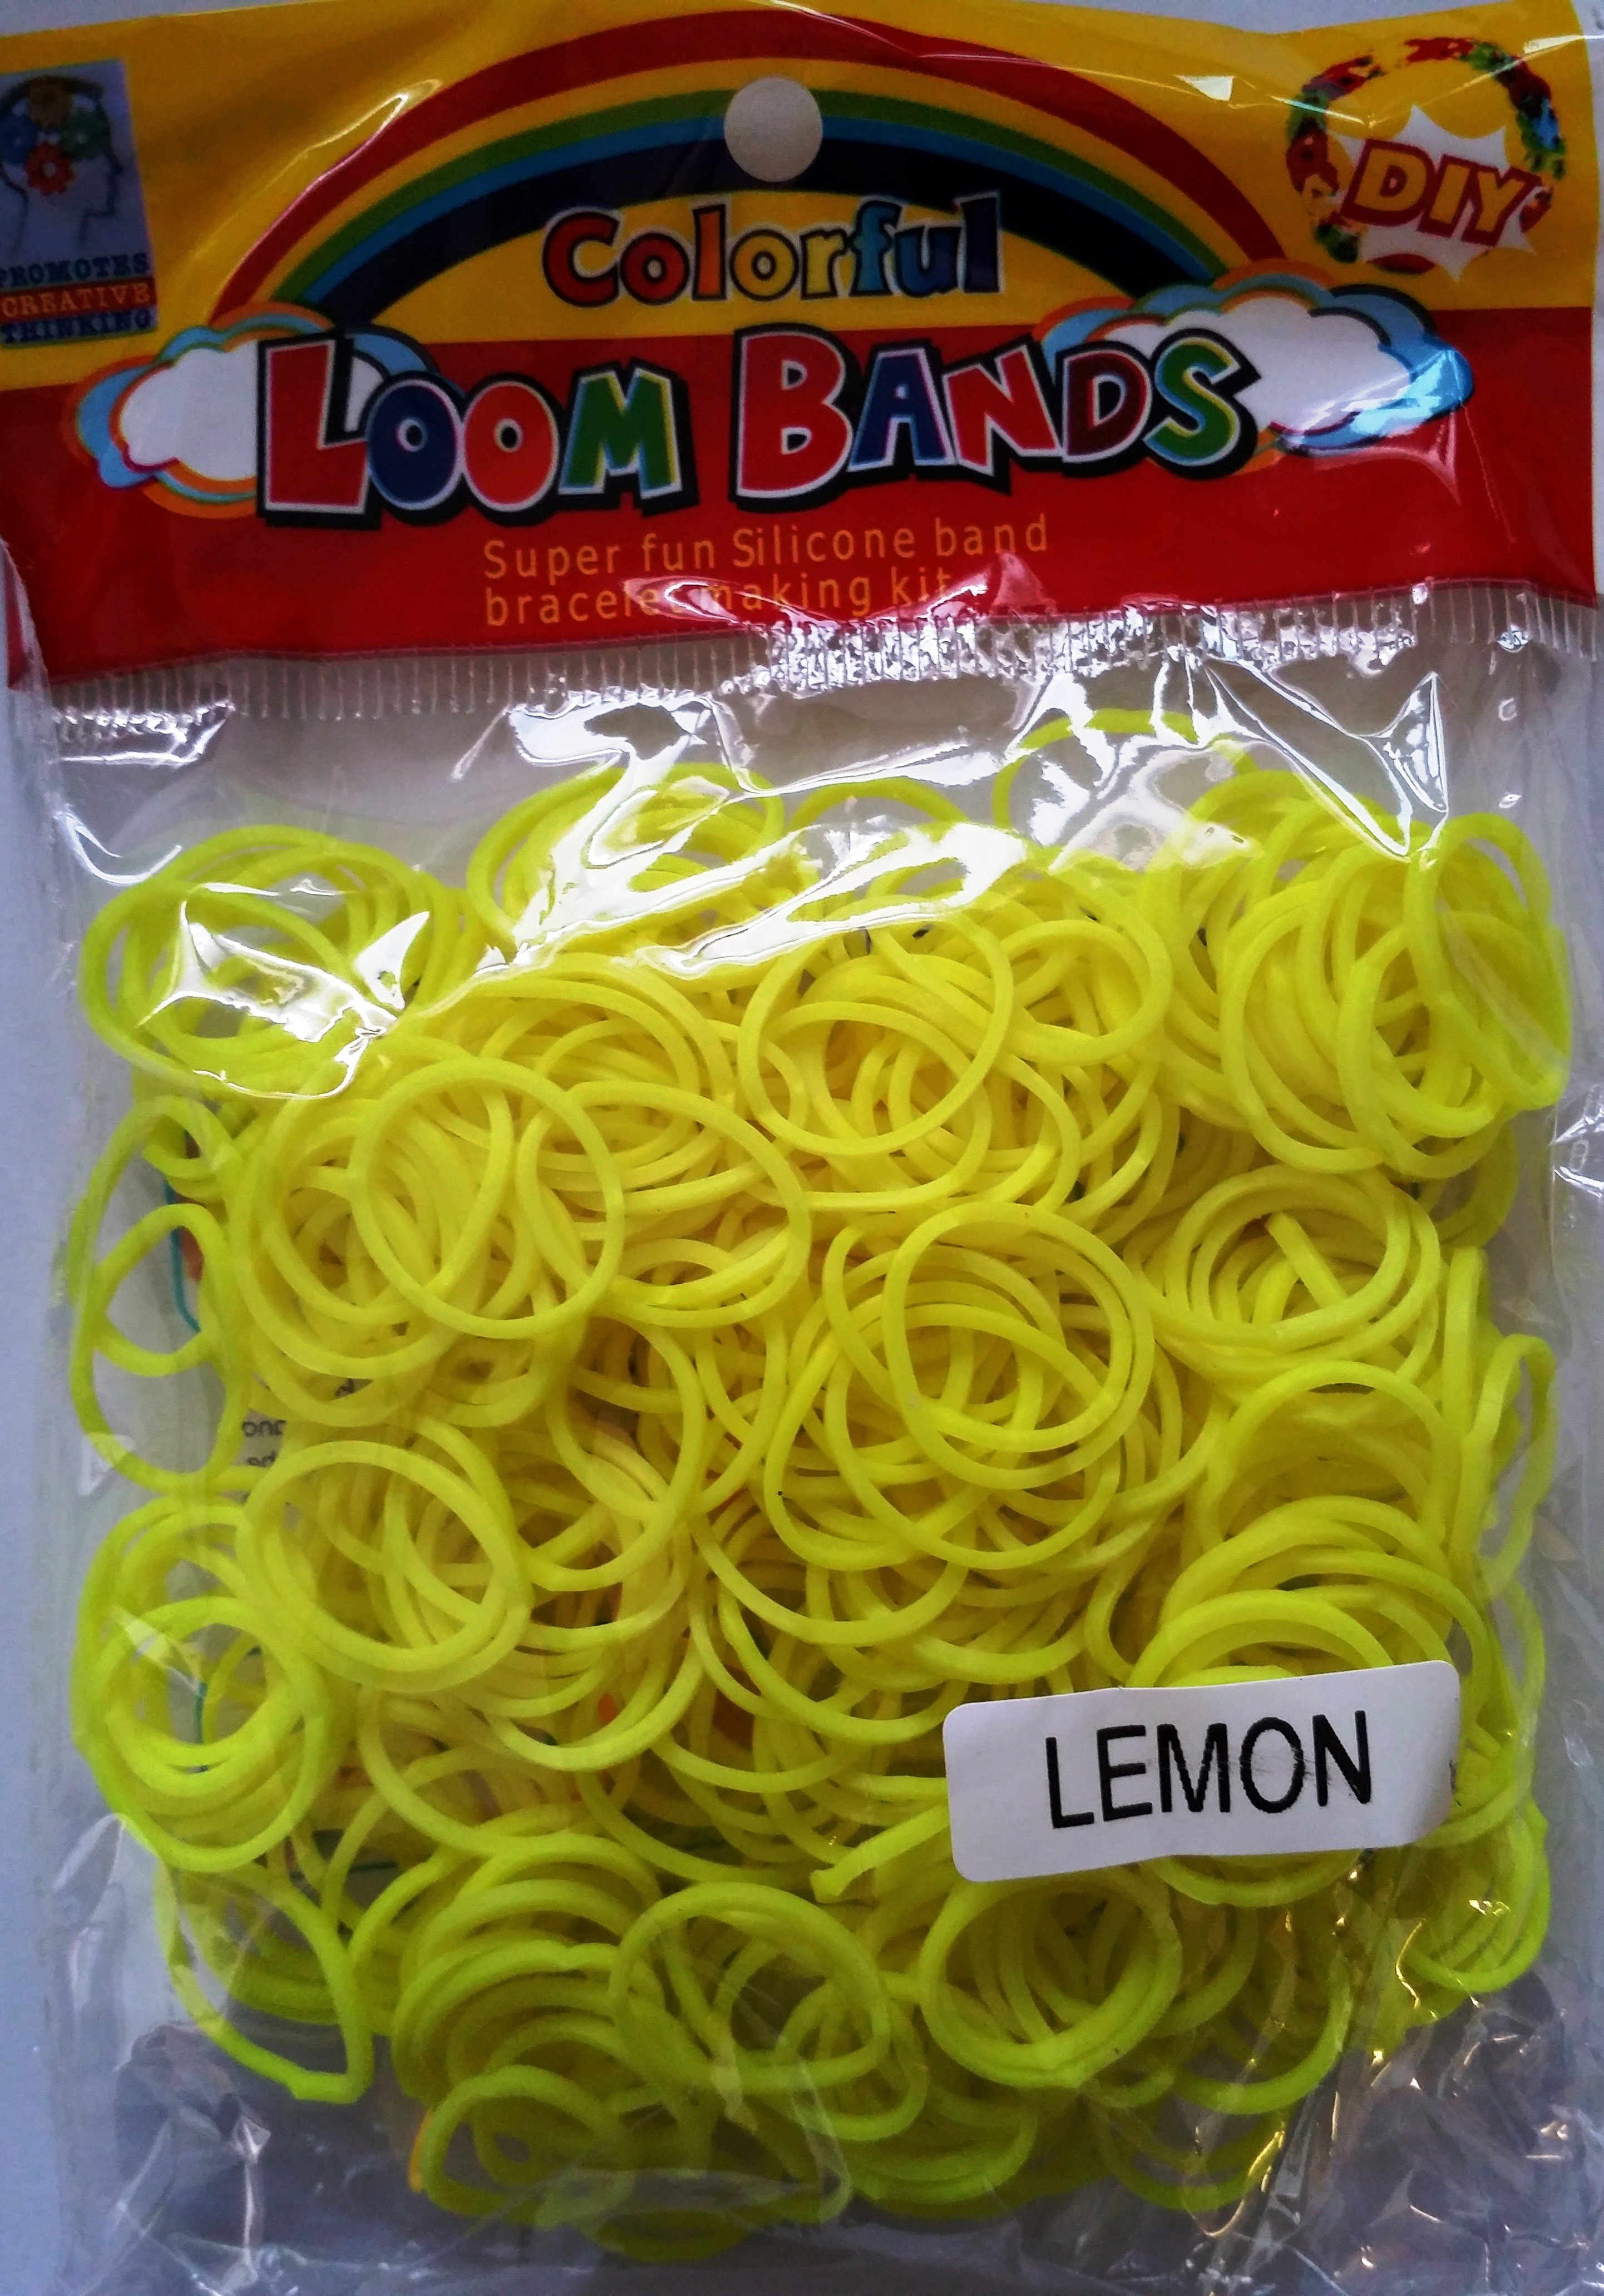 Colourful Loom Bands Bright Yellow Colour (Lemon Scented 300s) 12 Packs